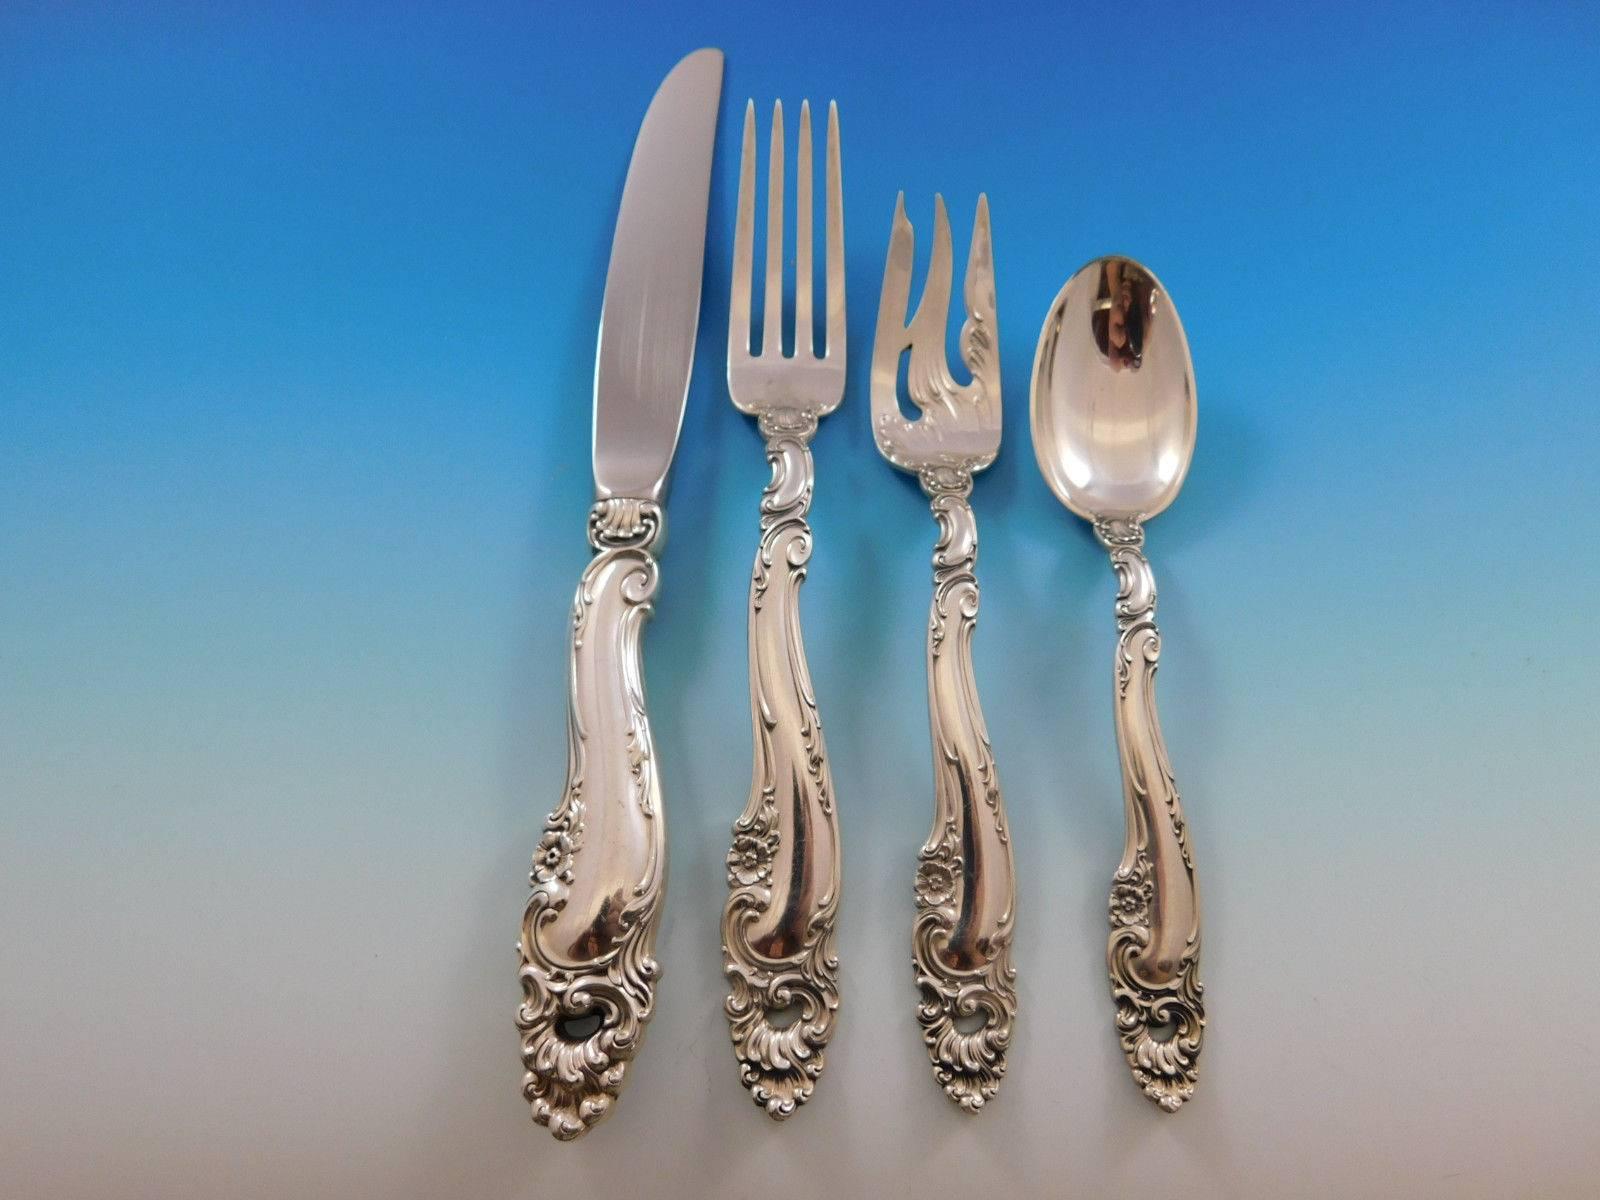 Decor by Gorham sterling silver flatware set, 32 pieces. This set includes:

Measure: Eight Knives, 8 3/4